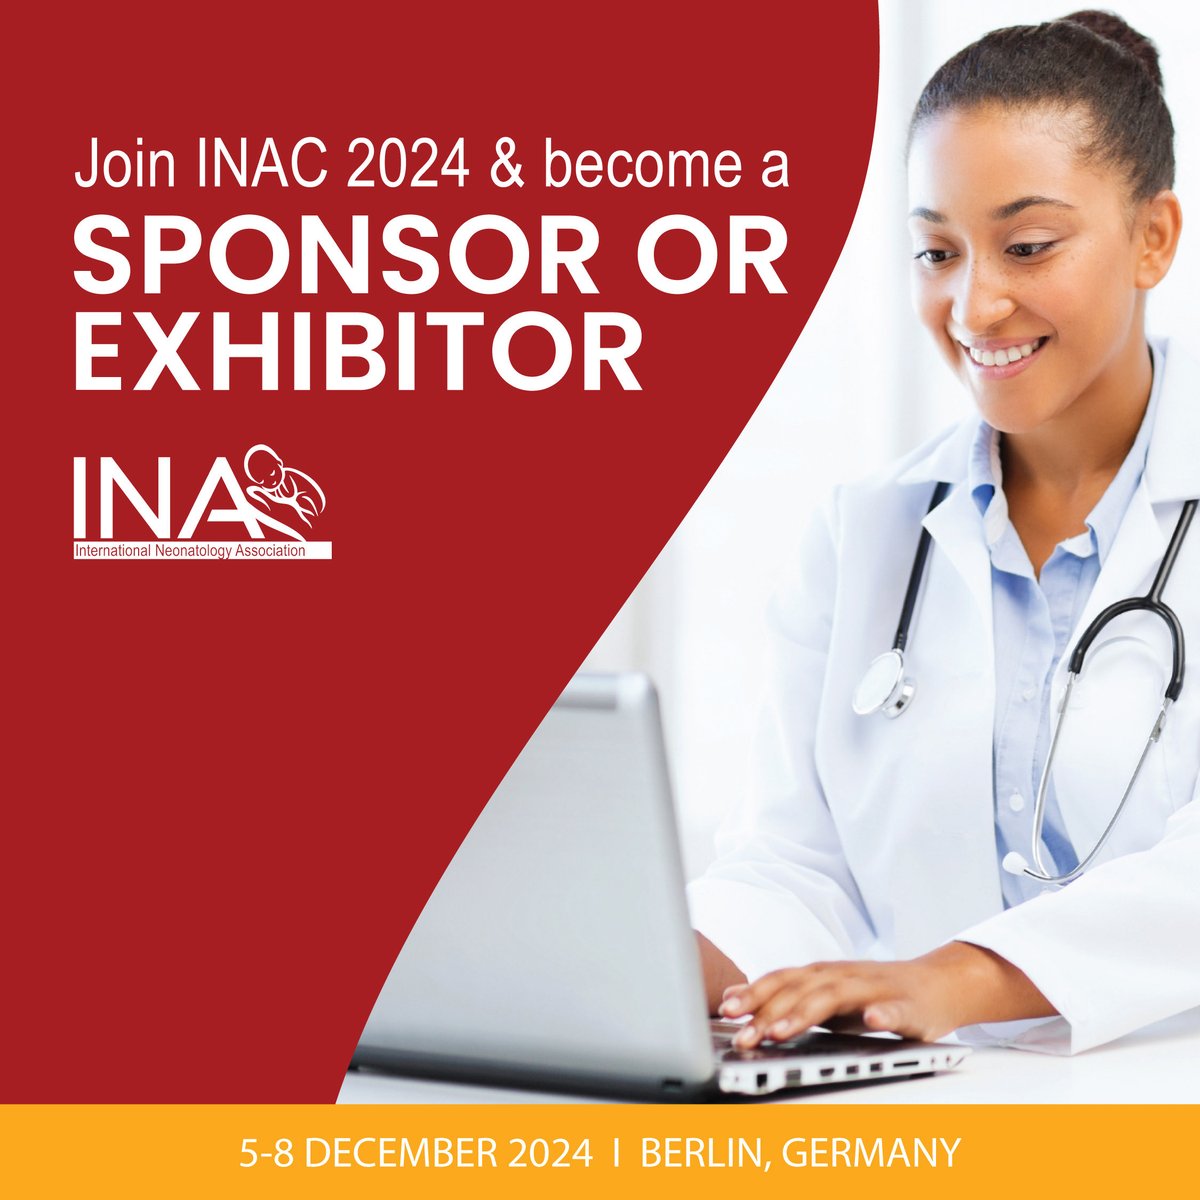 Unlock Your Brand's Potential at INAC 2024! Don't miss the chance to connect with many of leading professionals speakers at the INAC 2024 Conference. Explore our diverse sponsorship options made to your organization's needs & budget, ensuring full access to networking benefits.